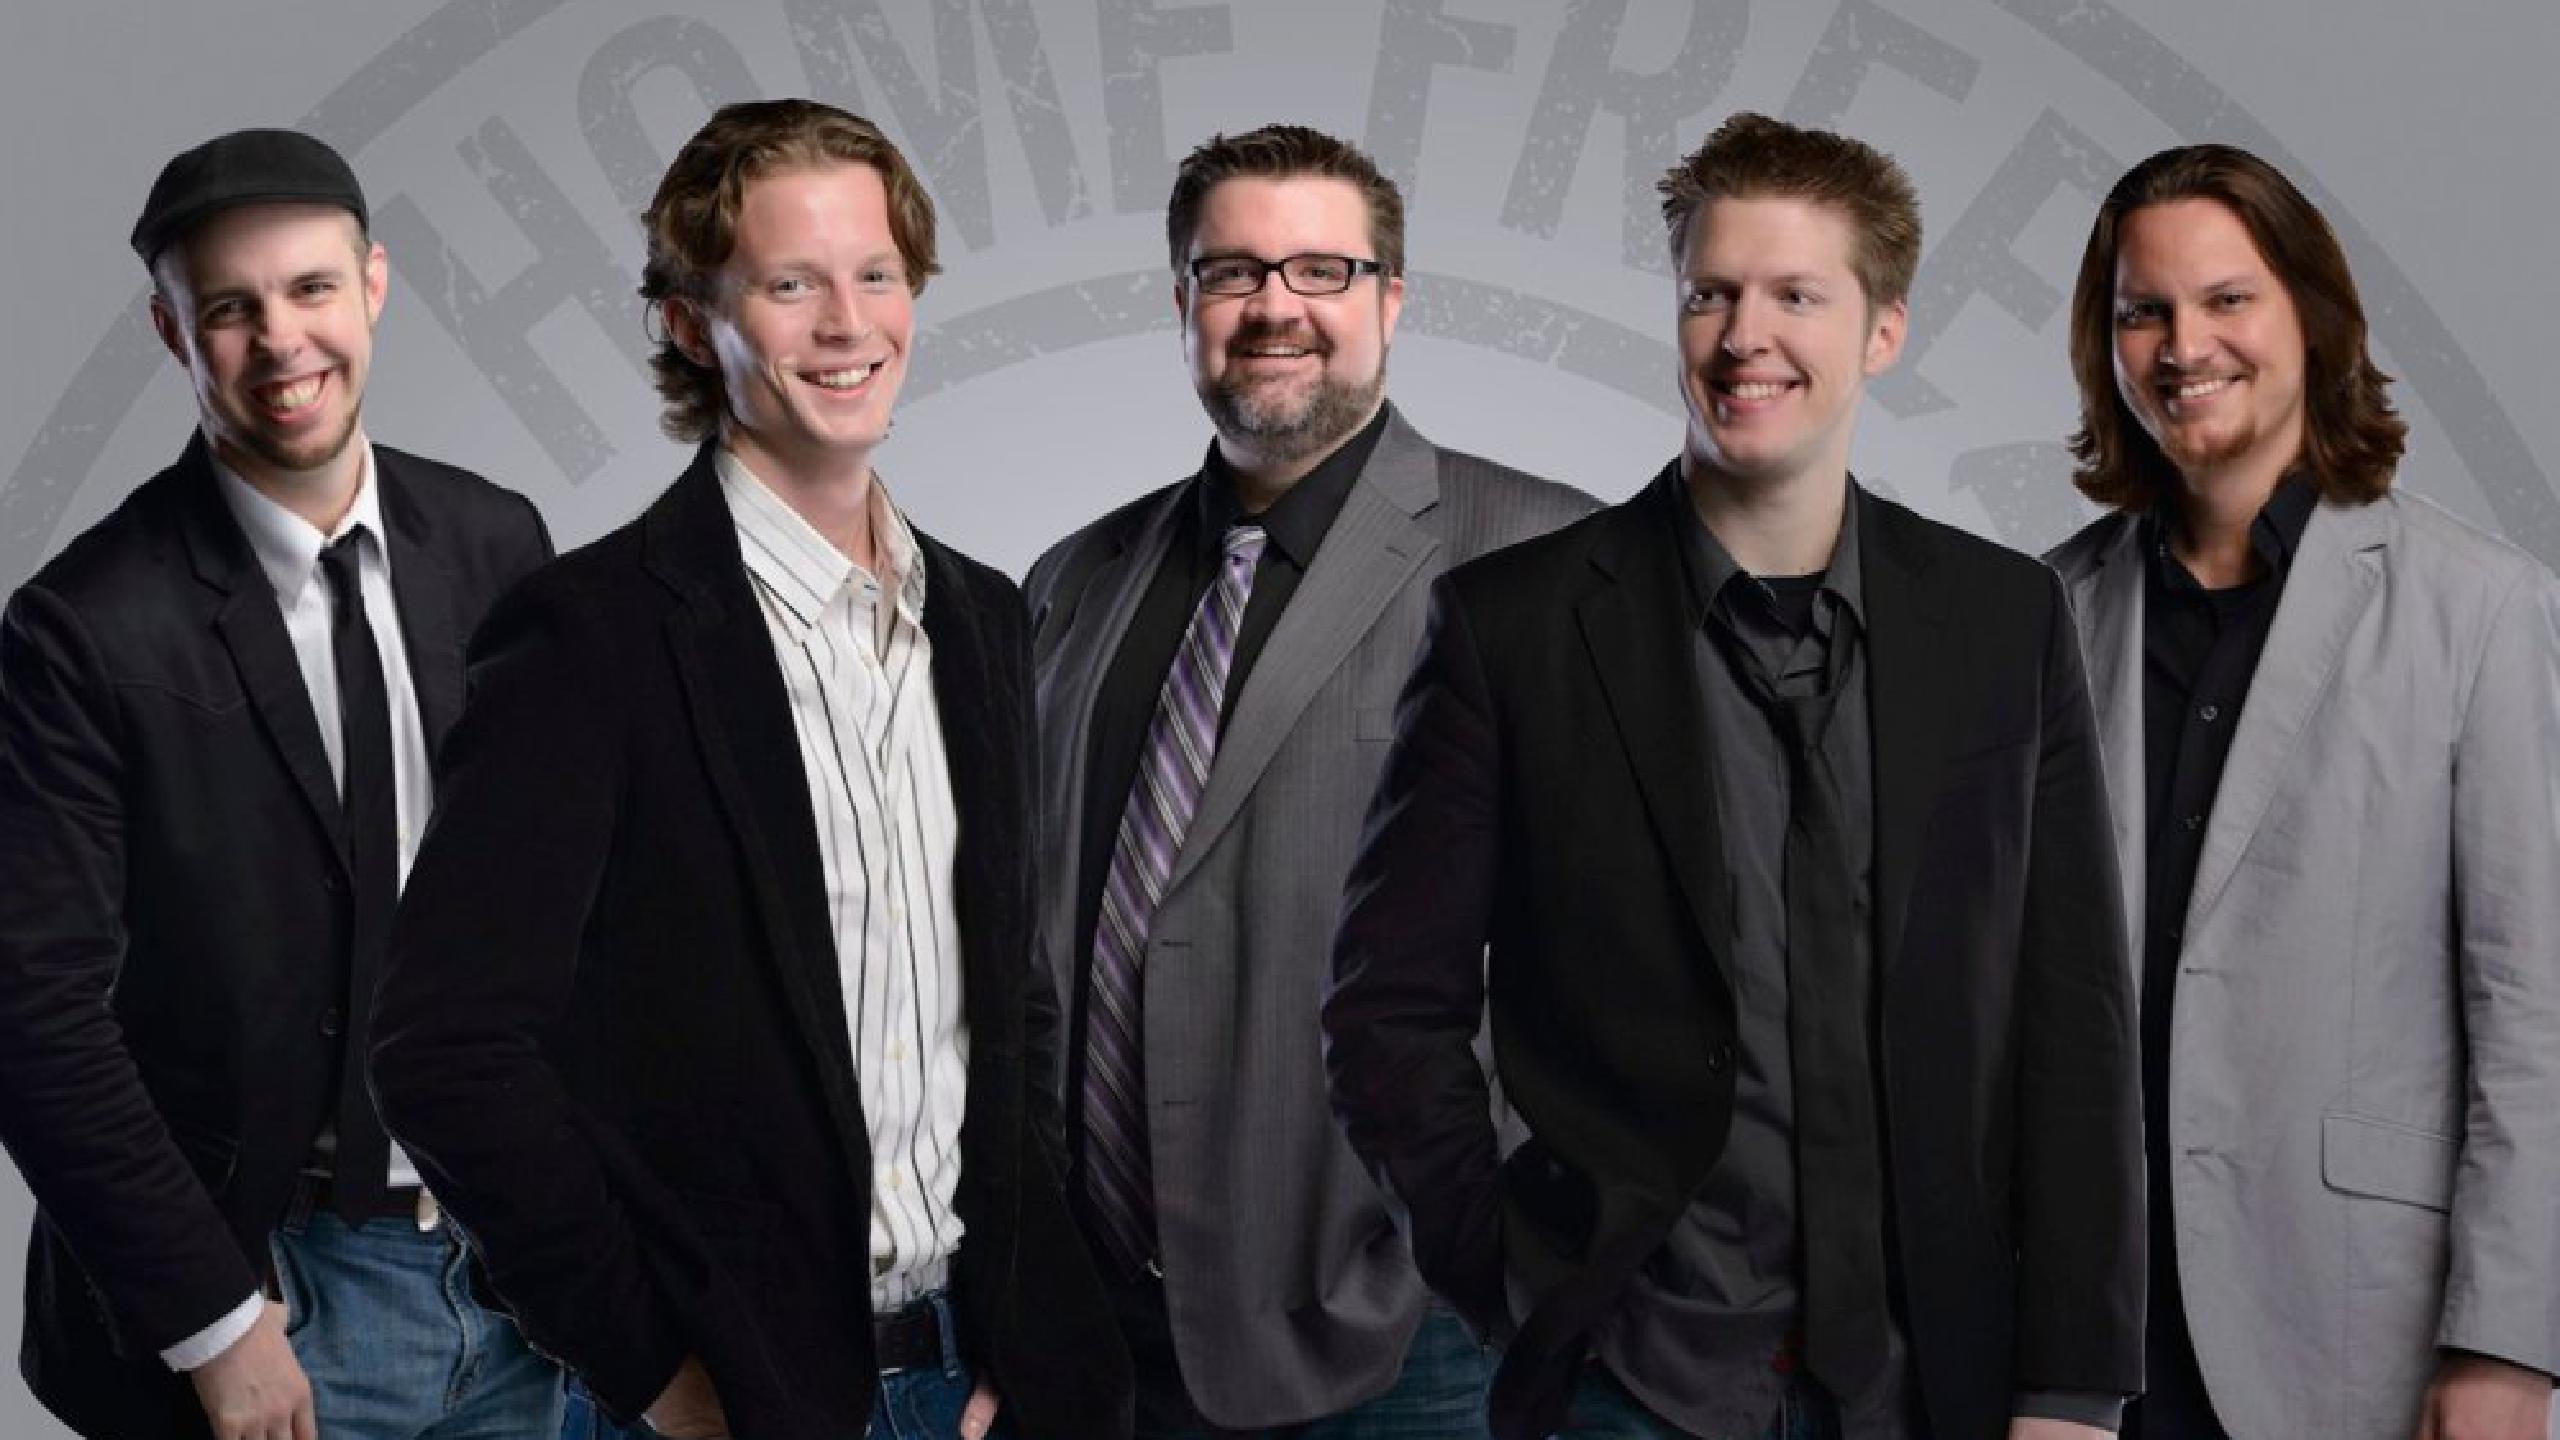 Home Free tour dates 2022 2023. Home Free tickets and concerts Wegow